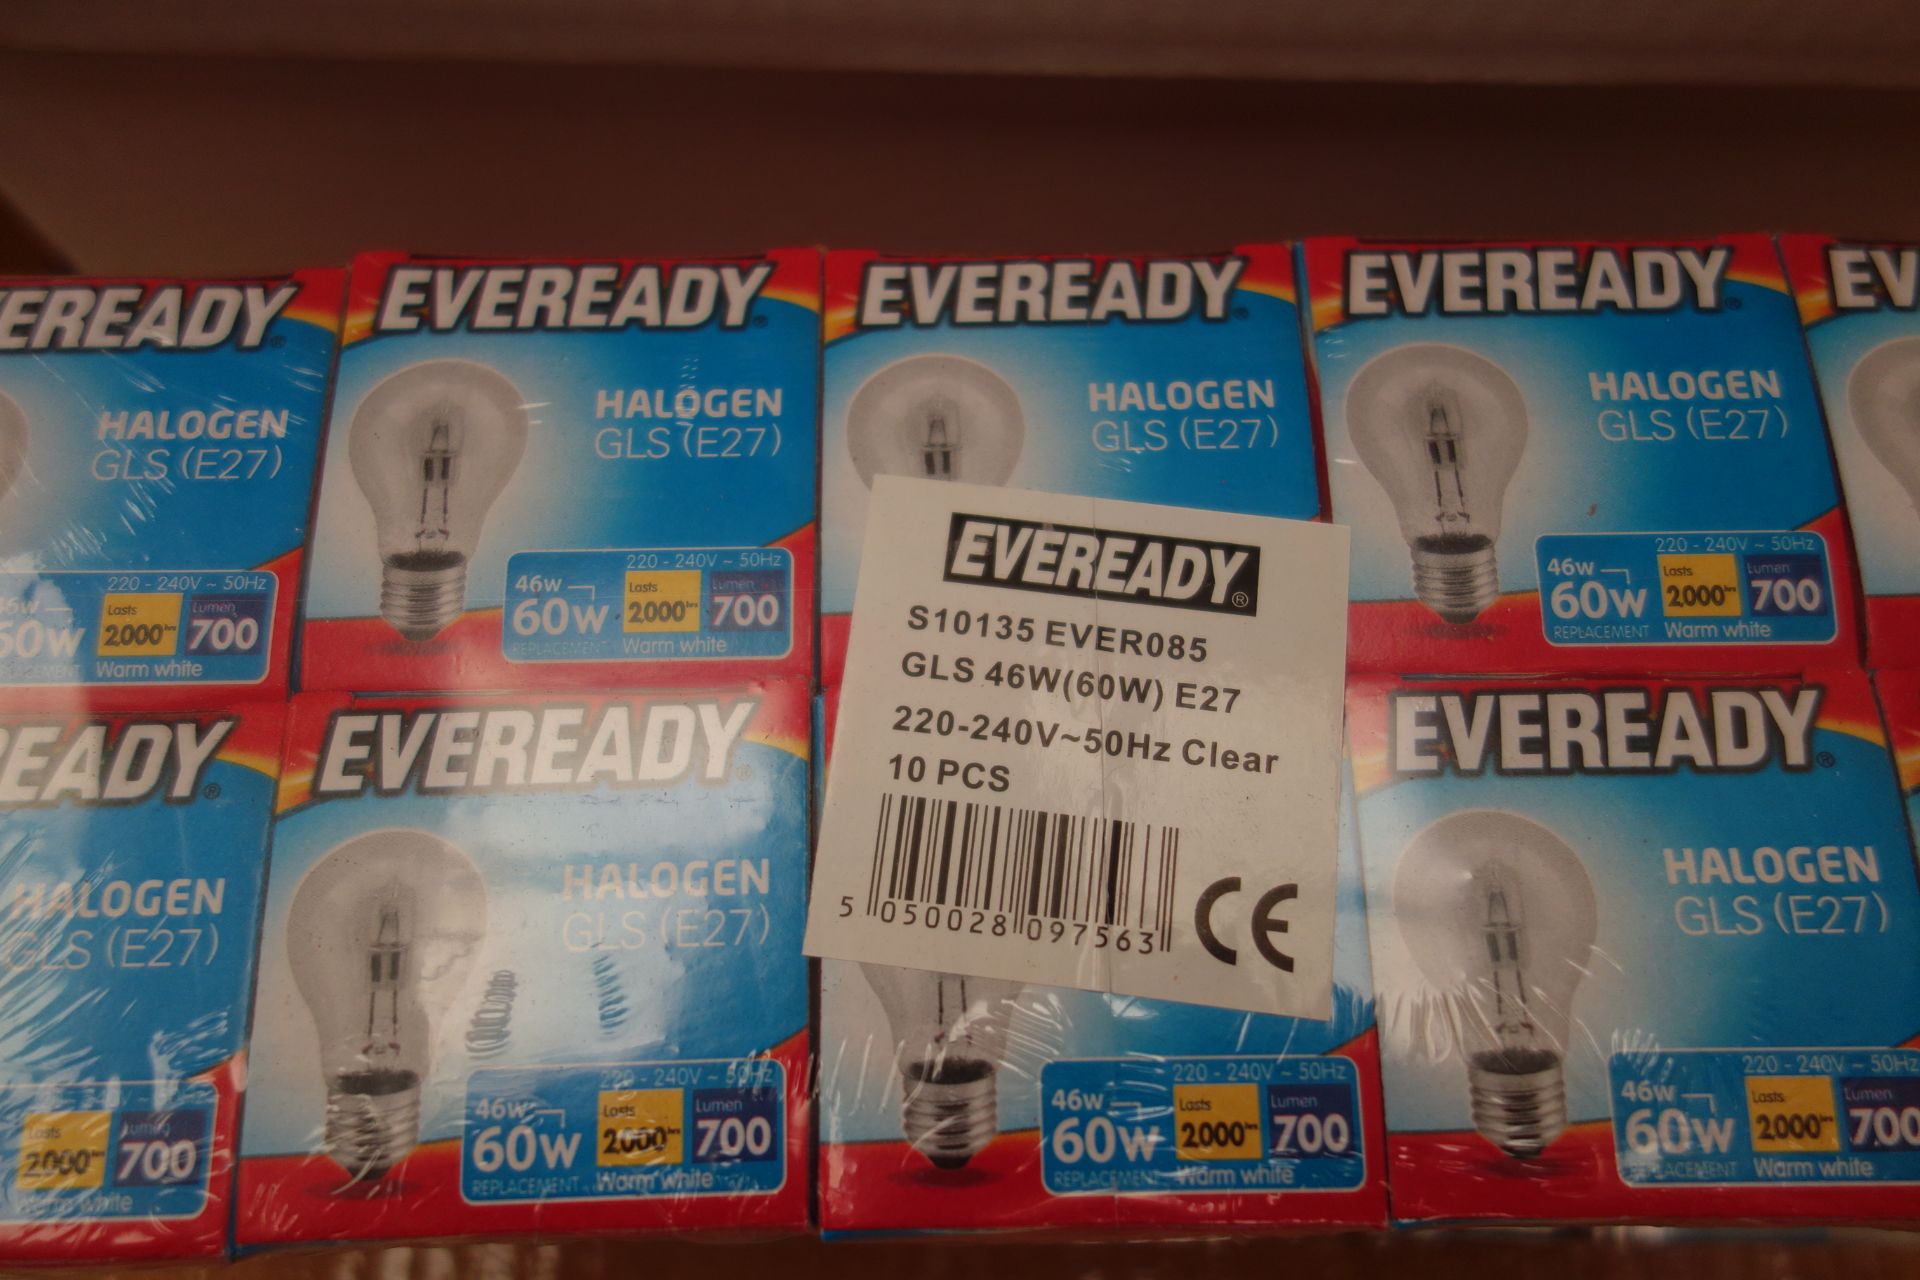 200x Eveready 510135 Halogen GLS (E27) Lamps 46w (60w Replacement) Clear Glass